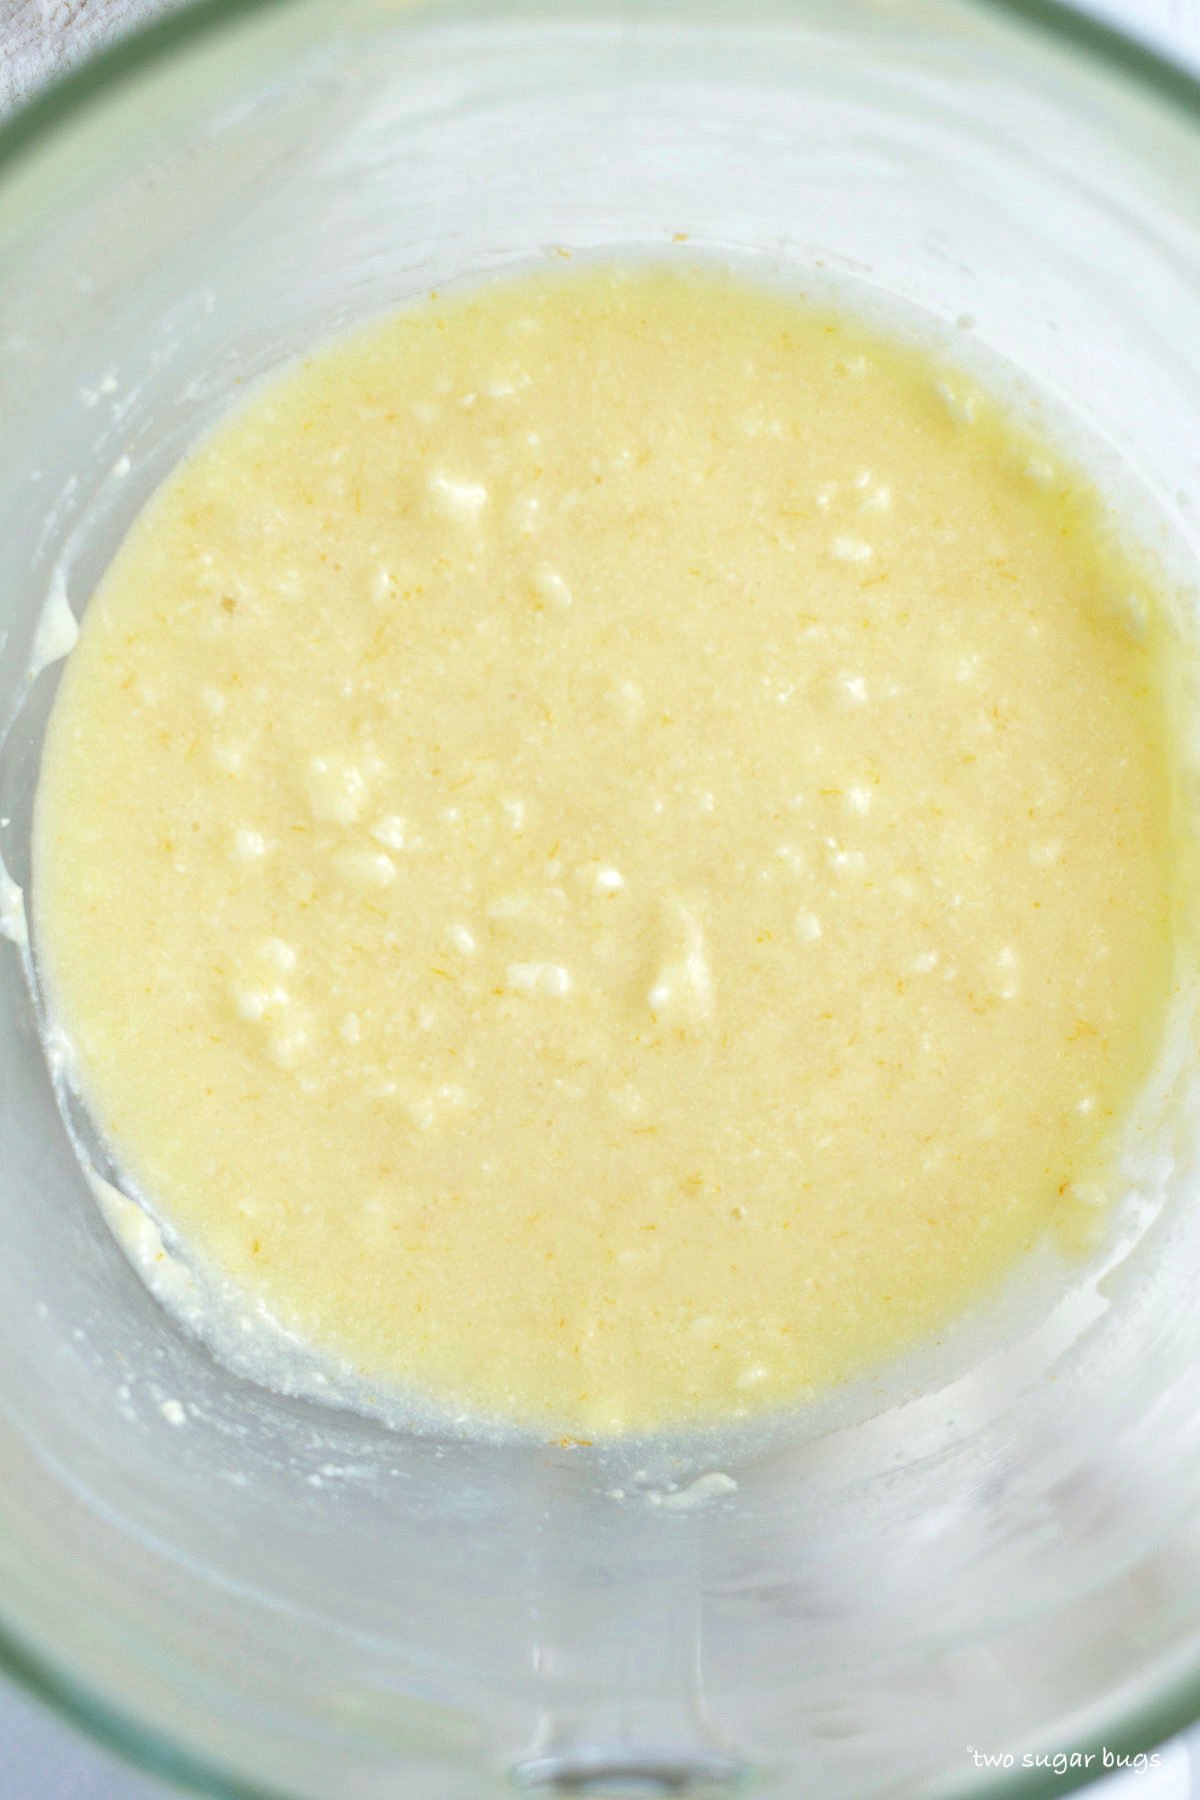 butter, ricotta and sugar in a mixing bowl